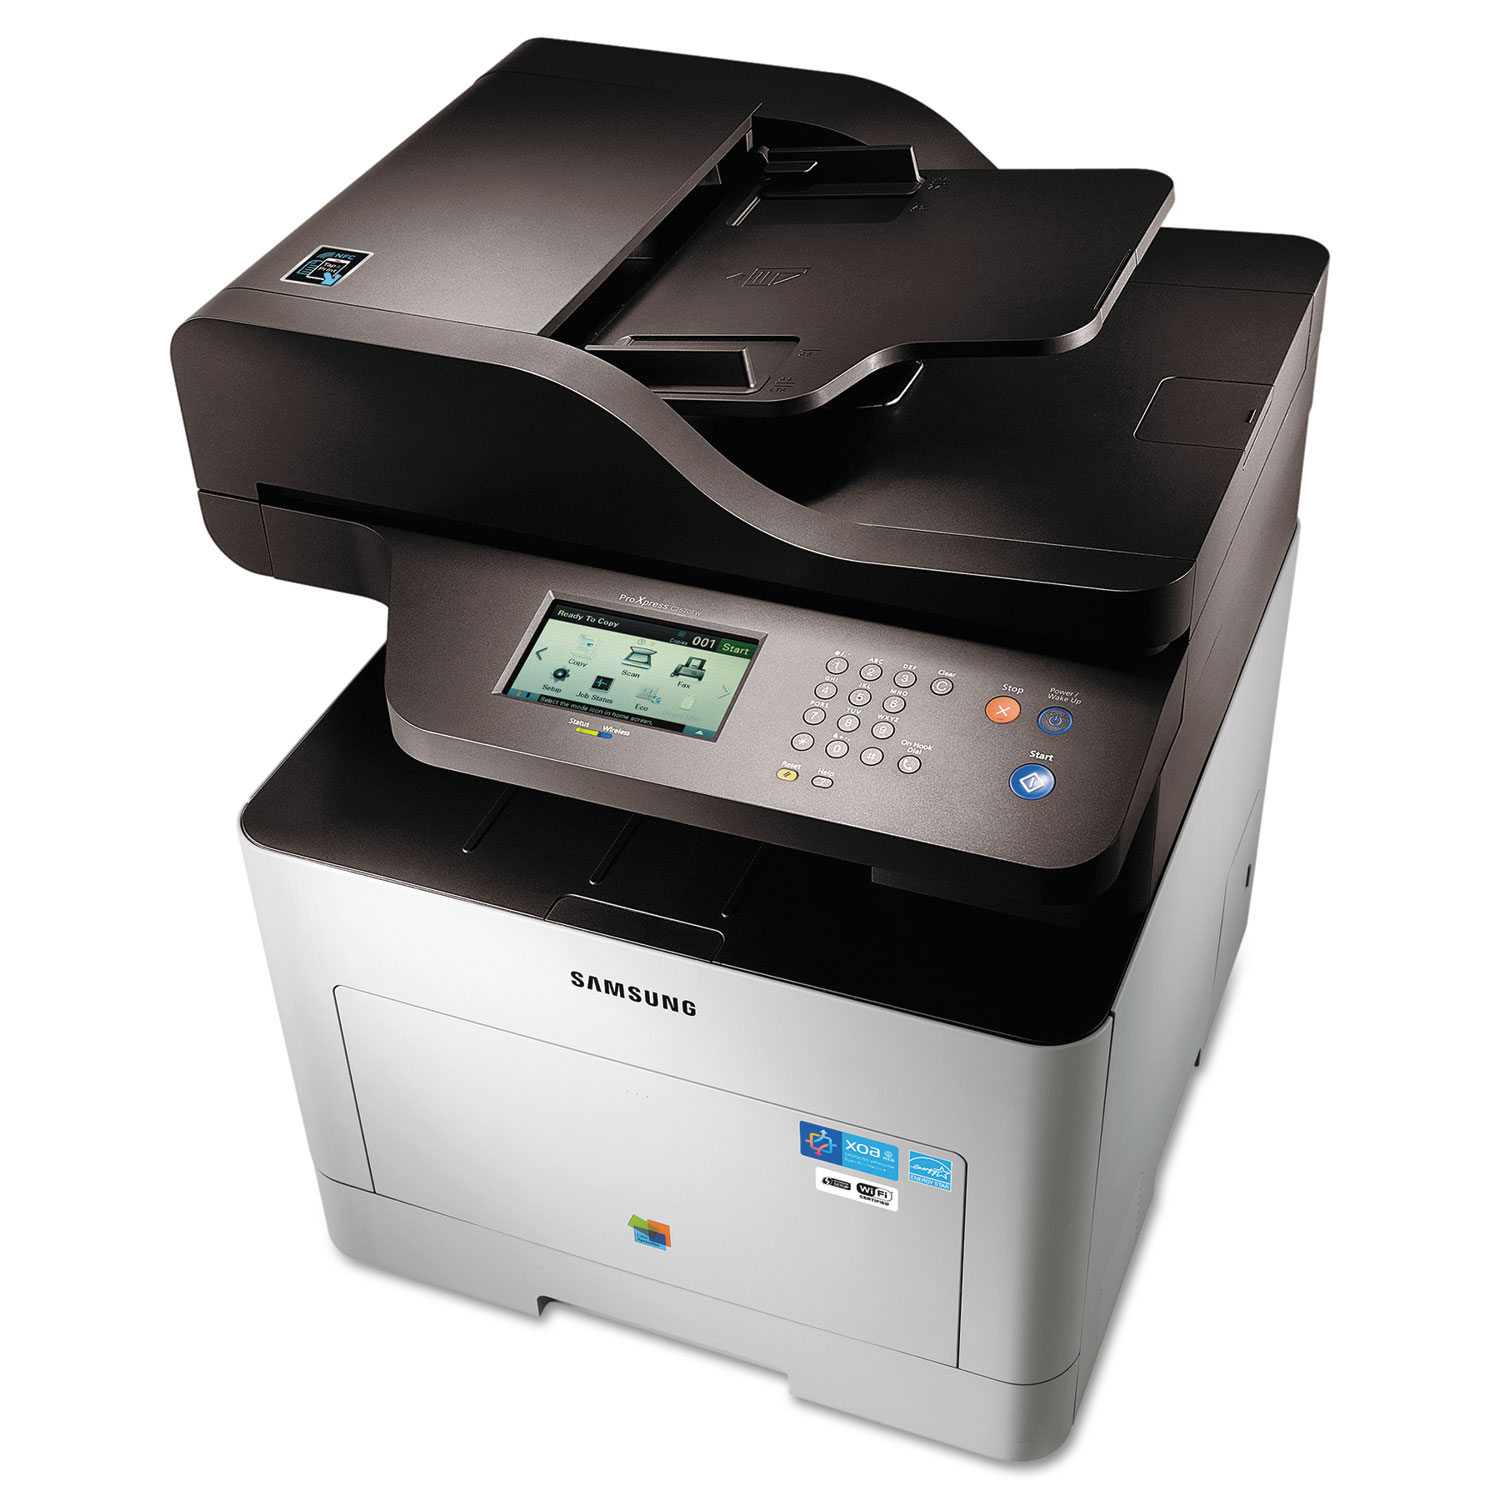 ProXpress C2670FW Color Wireless Multifunction Printer, Copy/Fax/Print/Scan